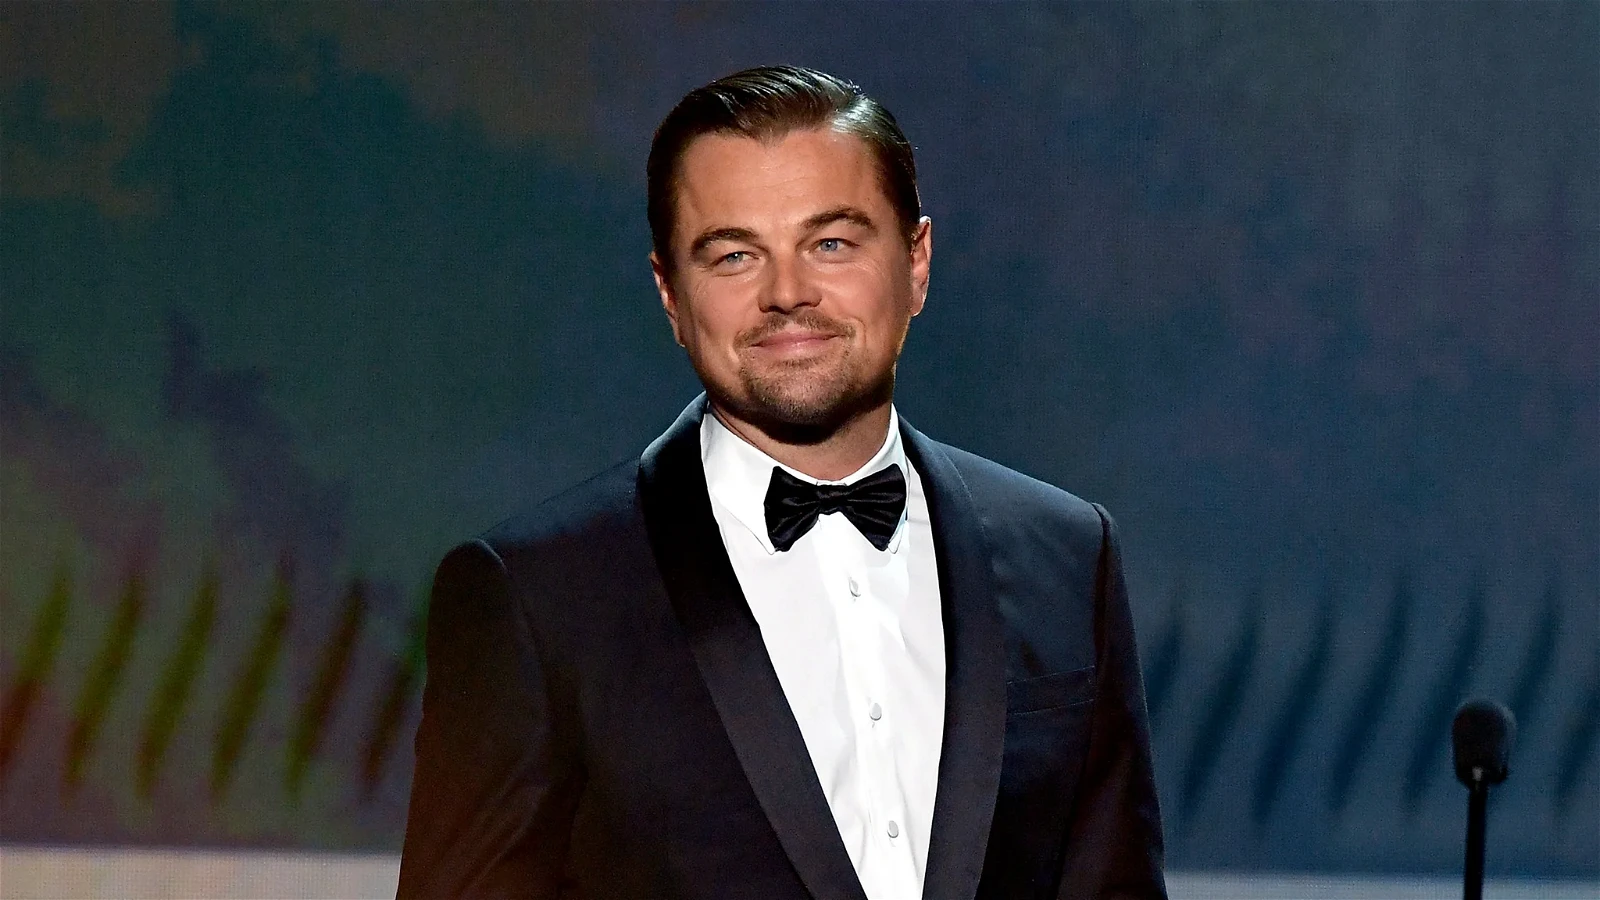 Leonardo DiCaprio is one of Hollywood's biggest crushes to date